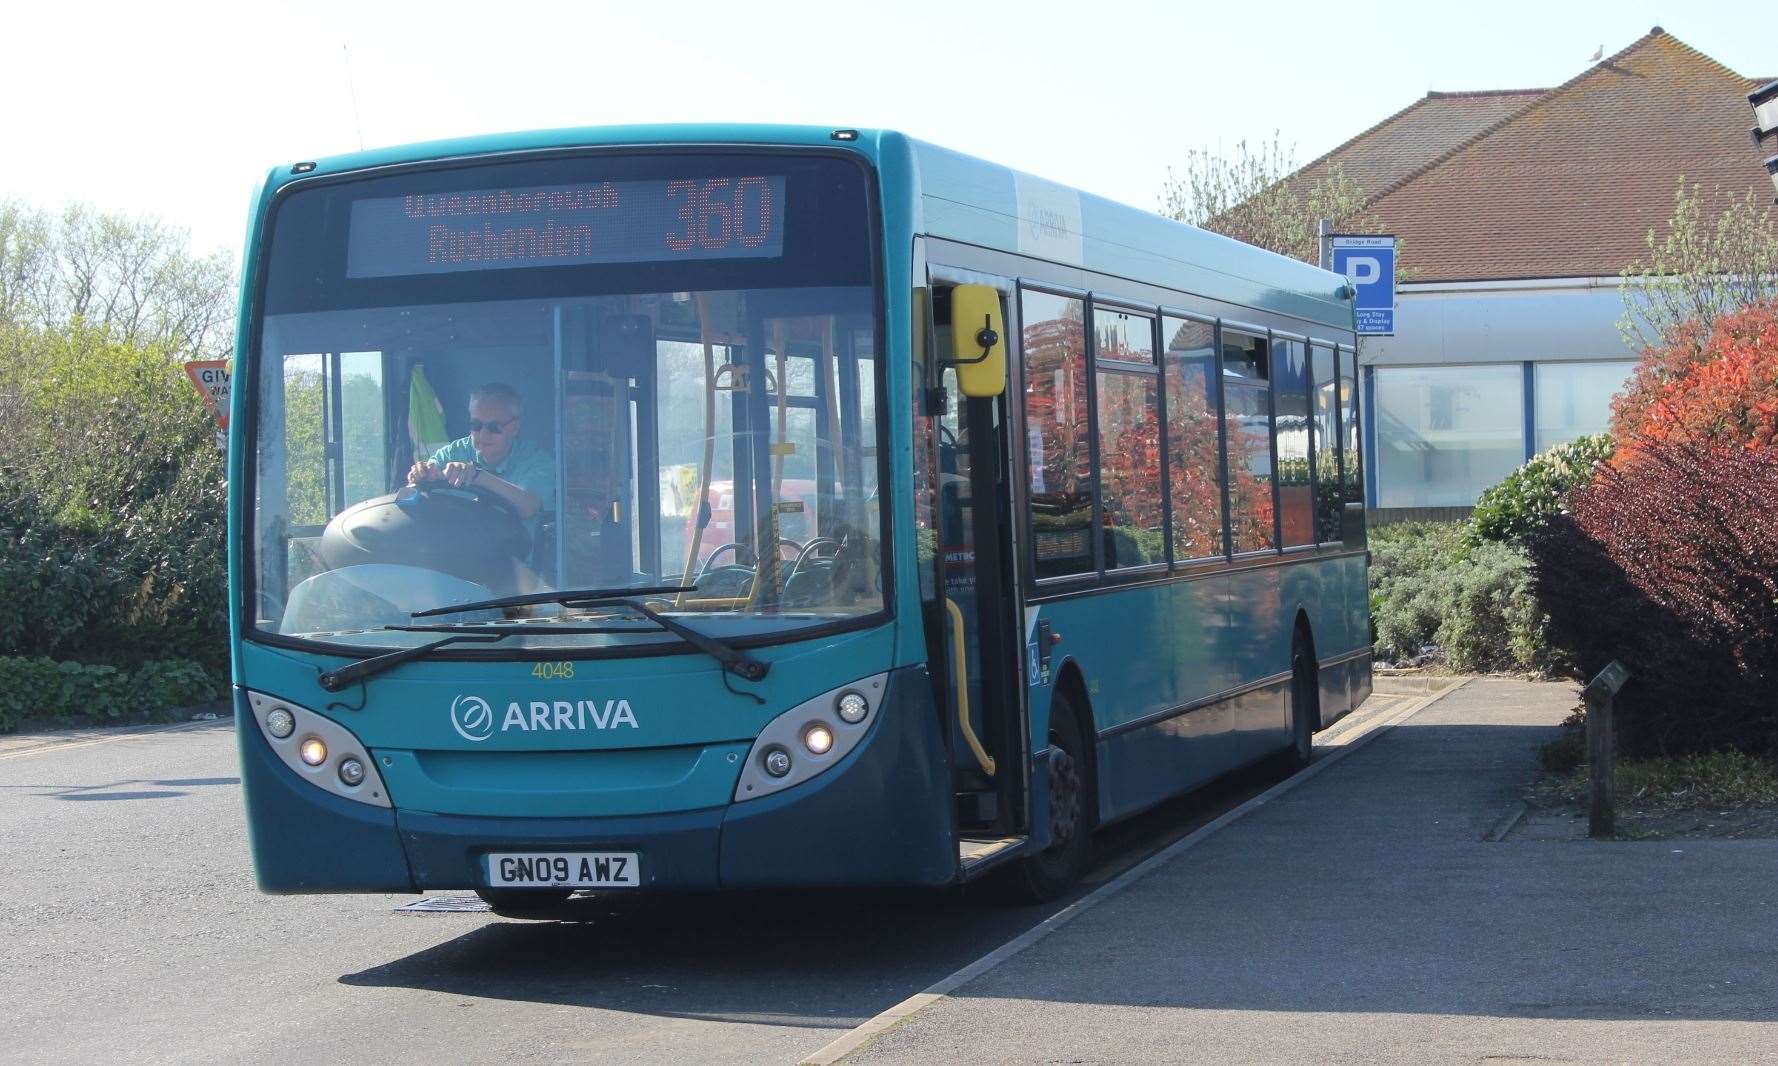 An Arriva bus in Sheerness